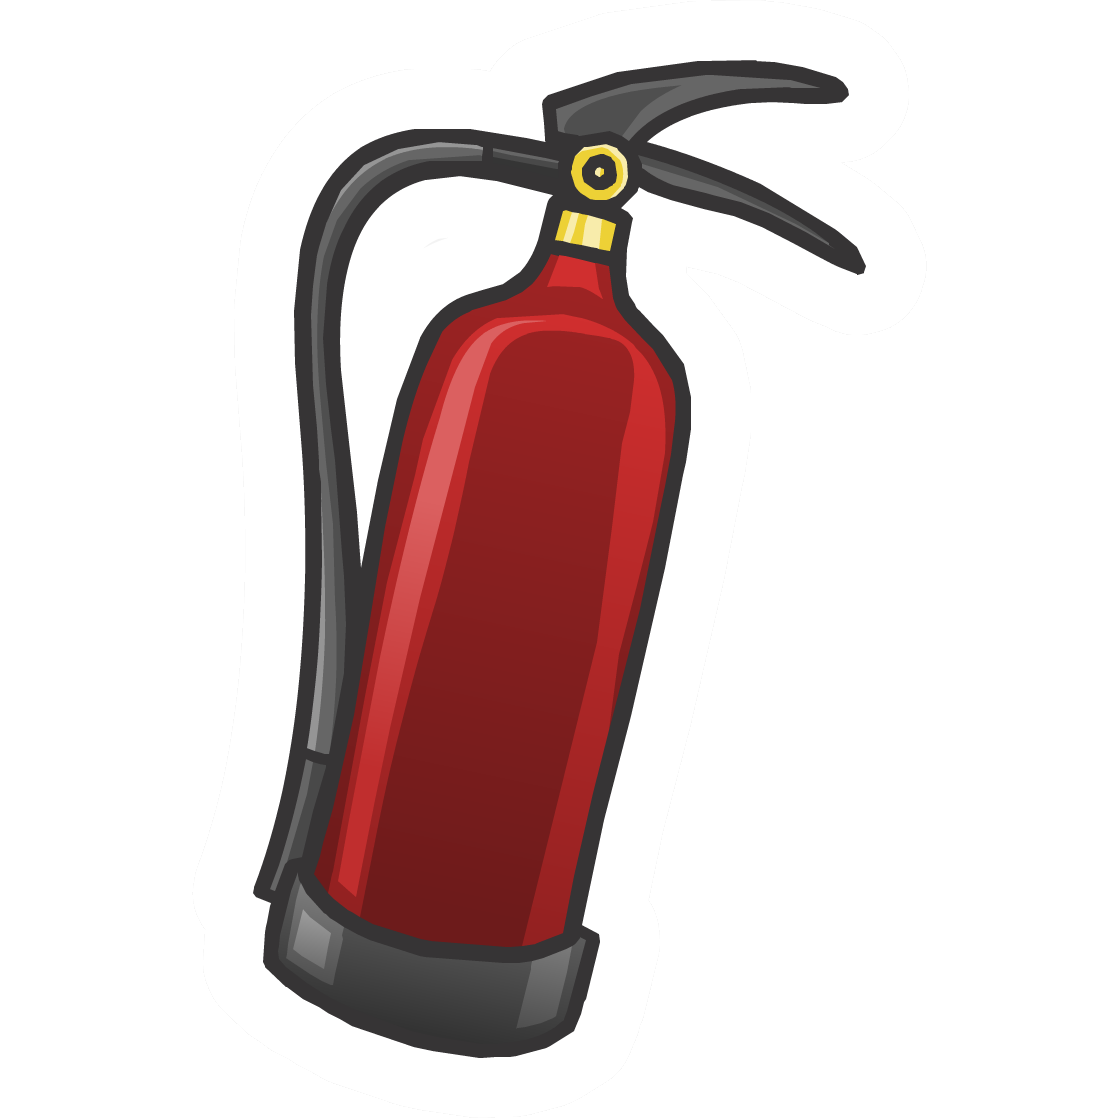 Fire Extinguisher Clipart   Clipart Panda   Free Clipart Images